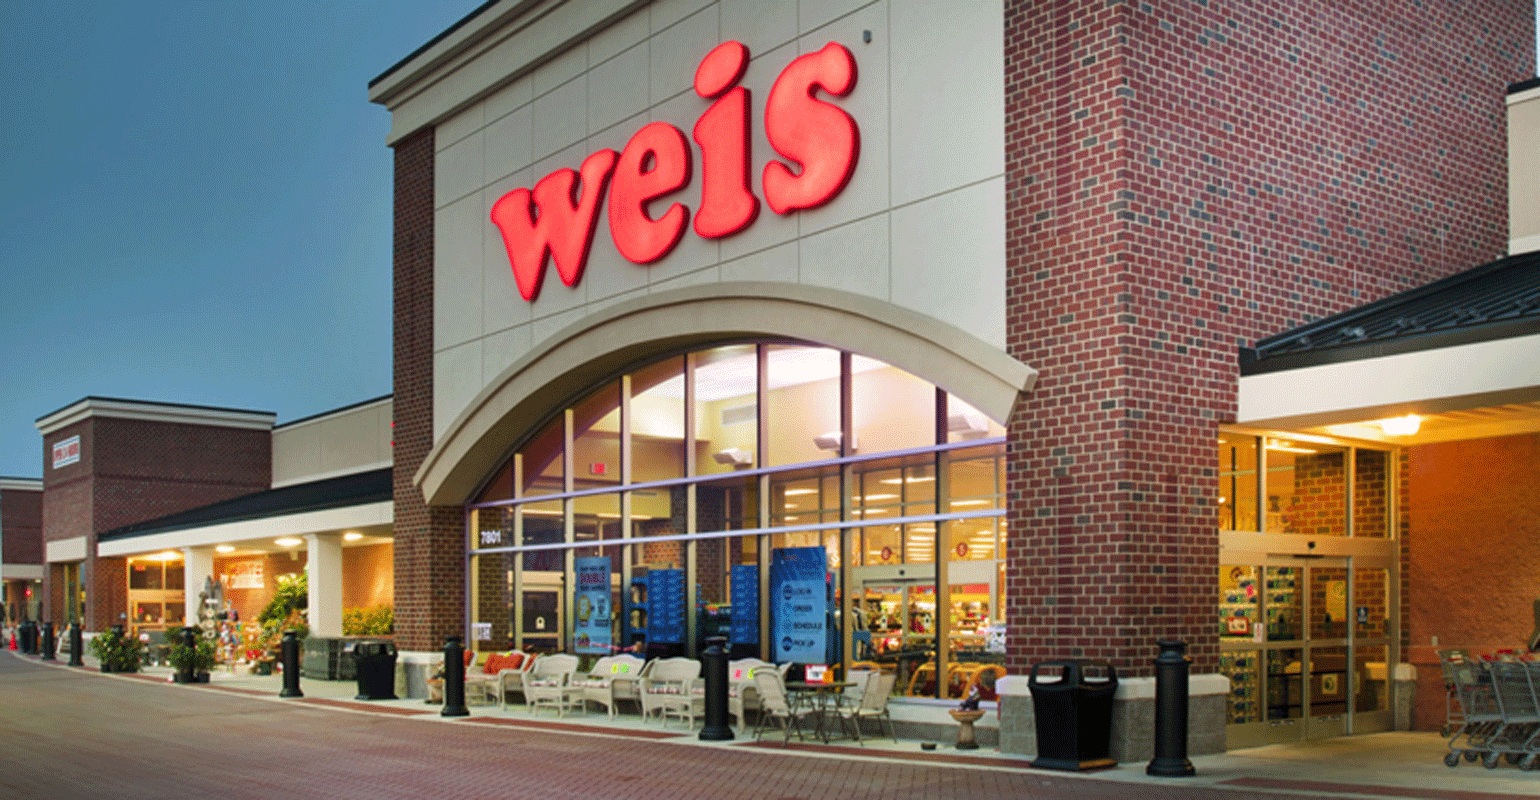 How to Sell to Weis Markets, Weis Markets Vendor, Sell to Weis Markets  Stores